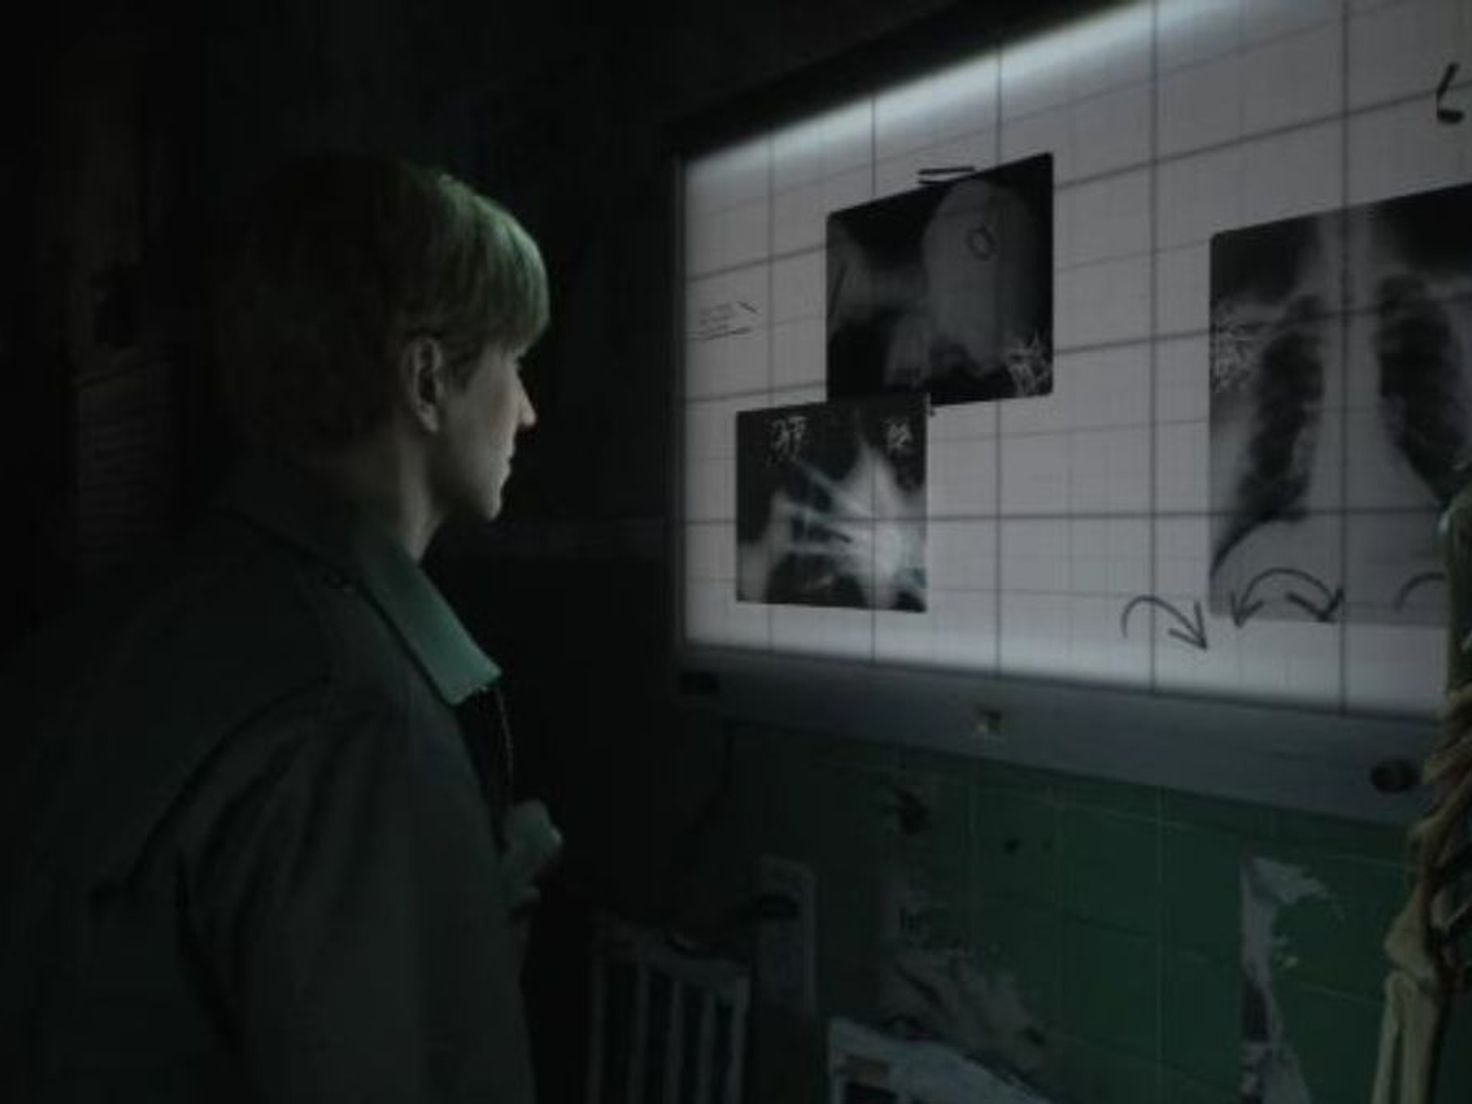 The Medium: New Xbox Series X Horror Game Channels Silent Hill